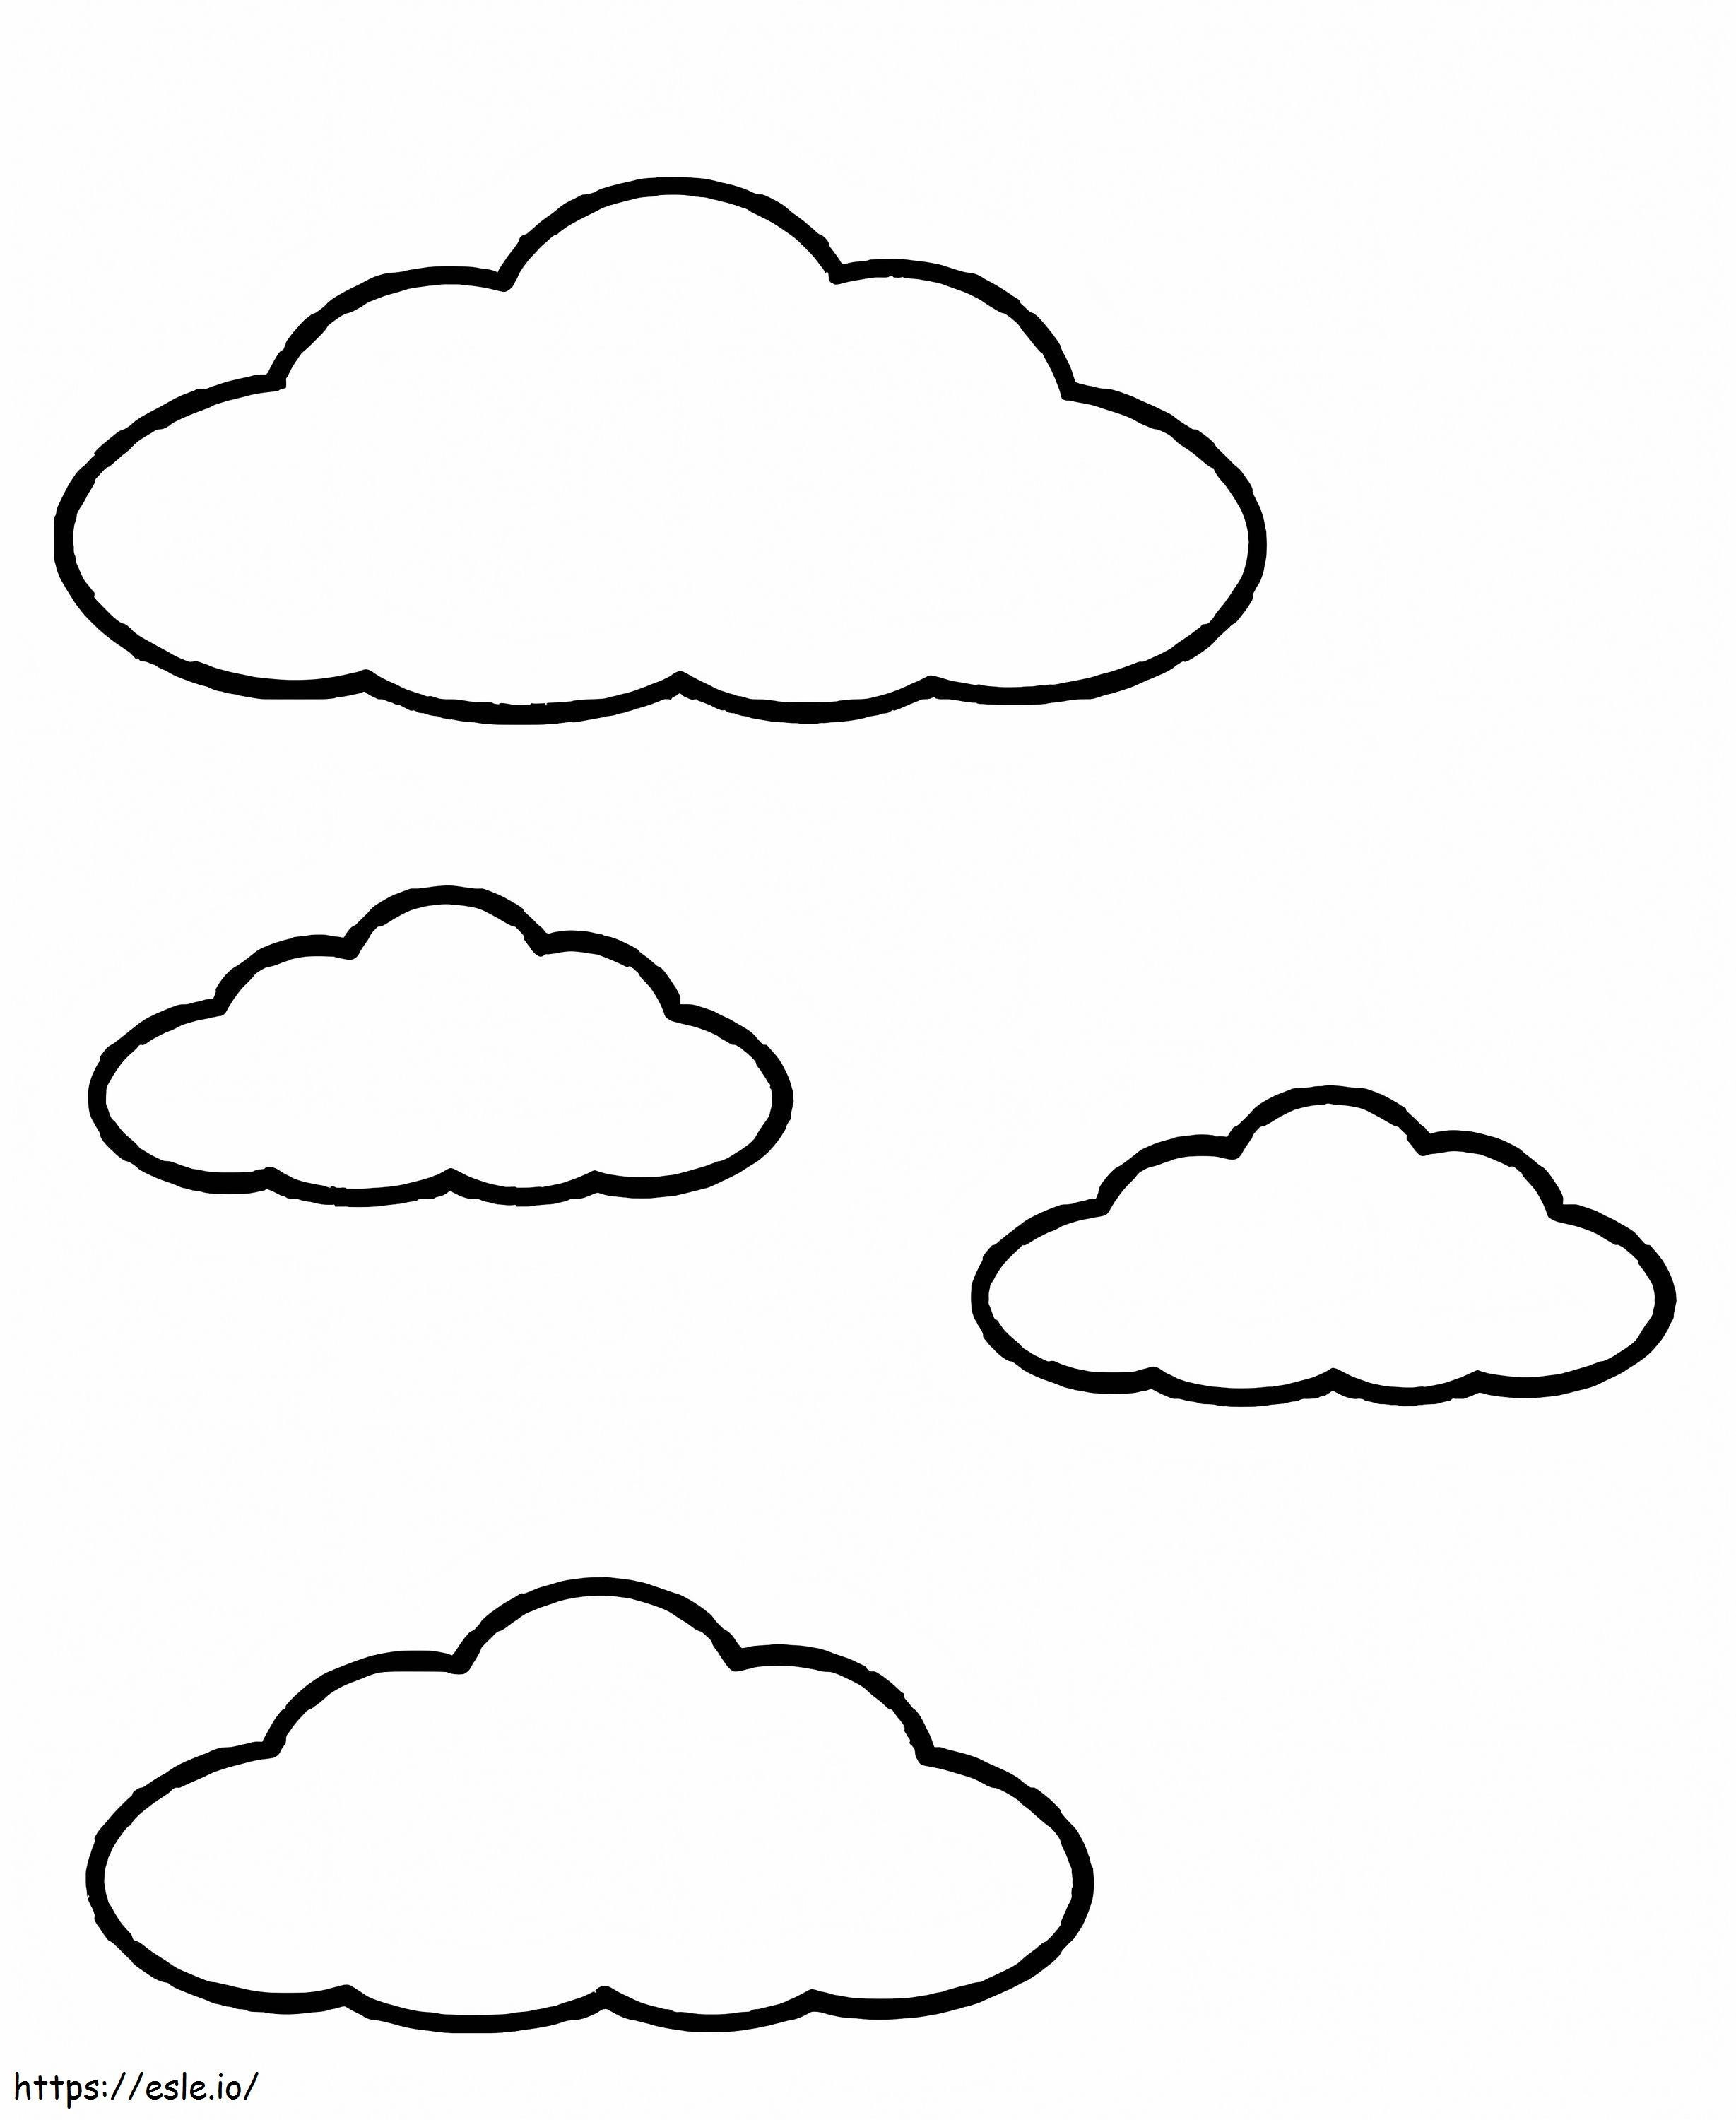 Four Clouds coloring page